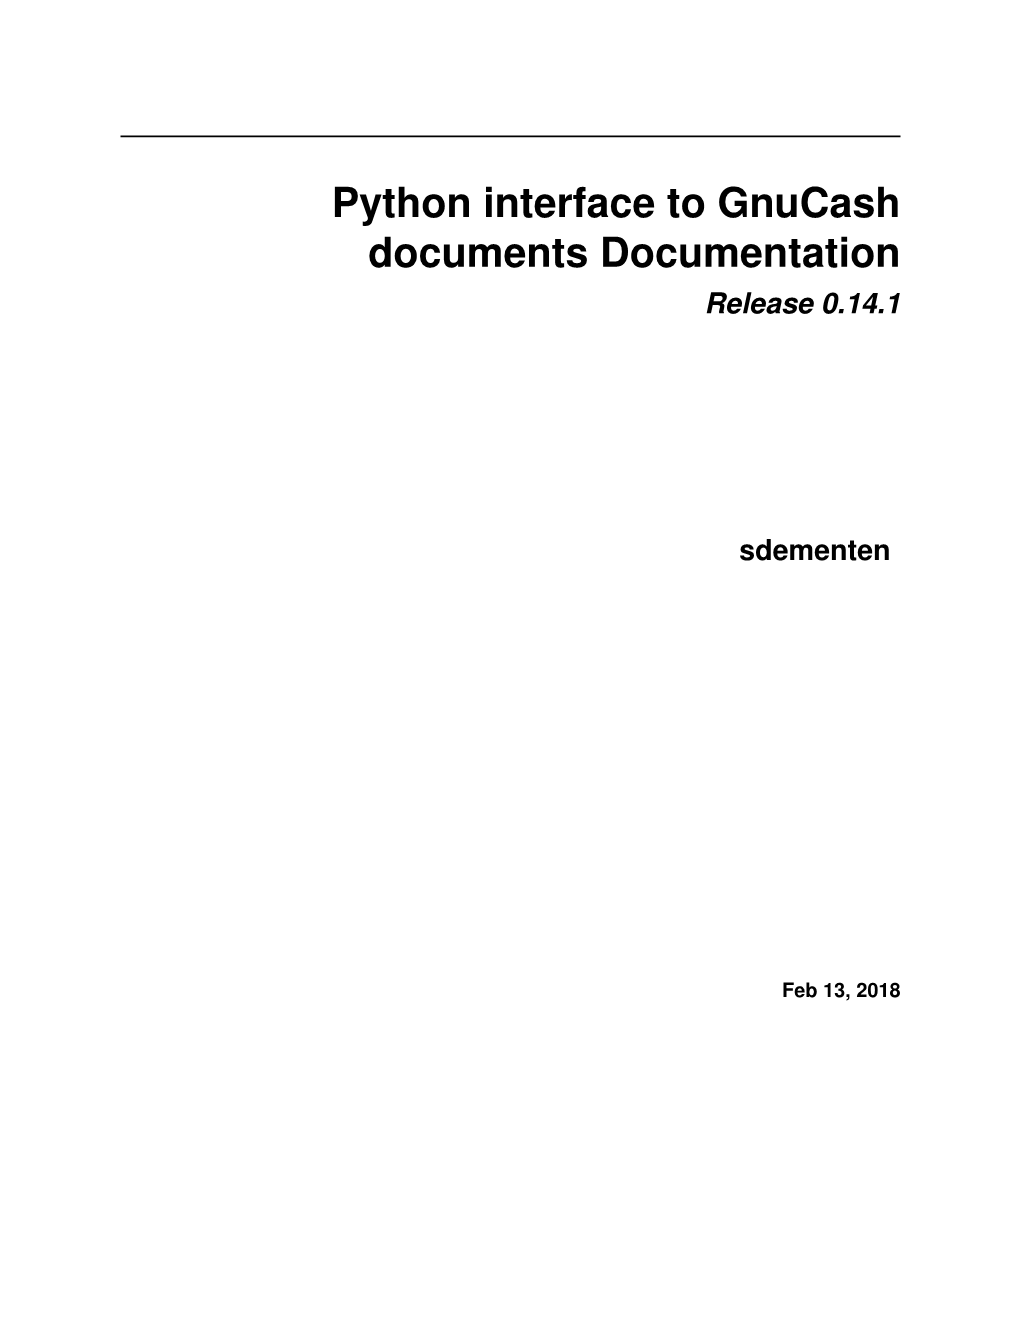 Python Interface to Gnucash Documents Documentation Release 0.14.1